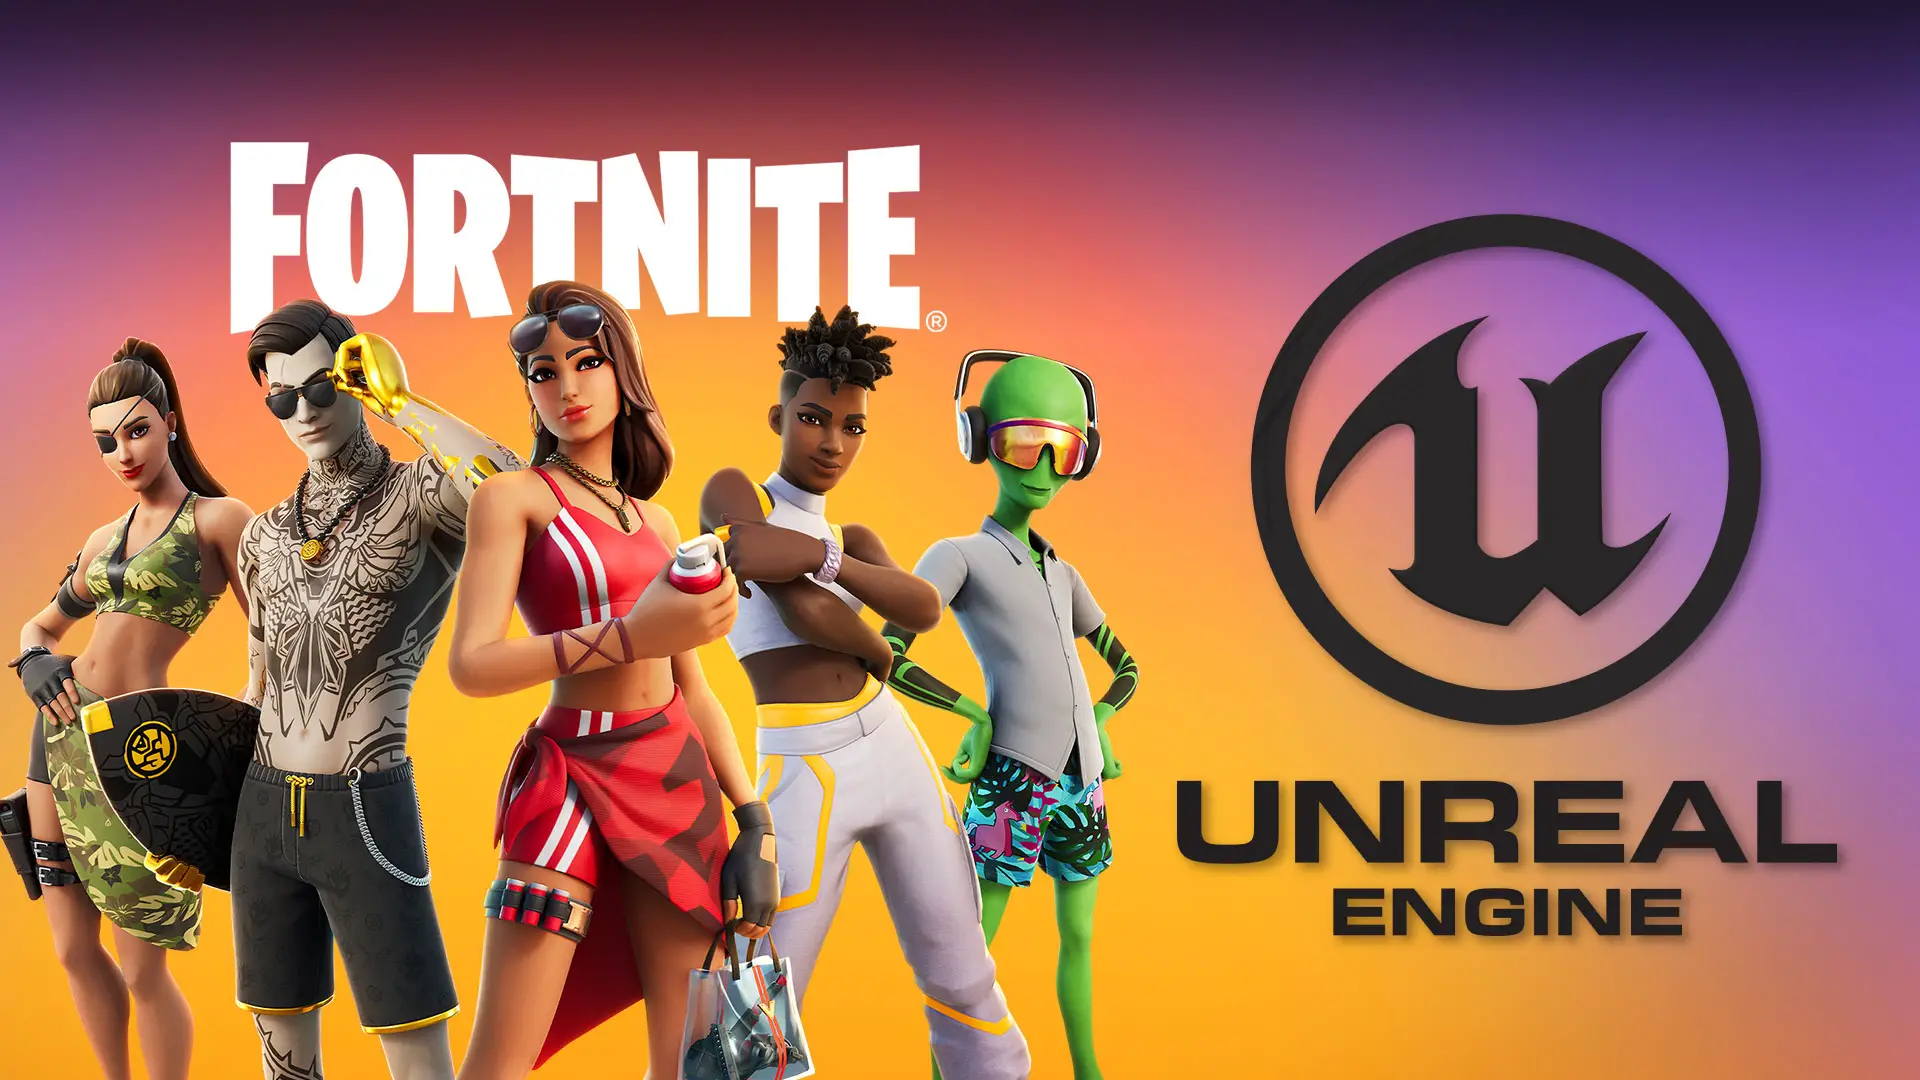 Epic Games will officially unveil Unreal Editor for Fortnite on March 22